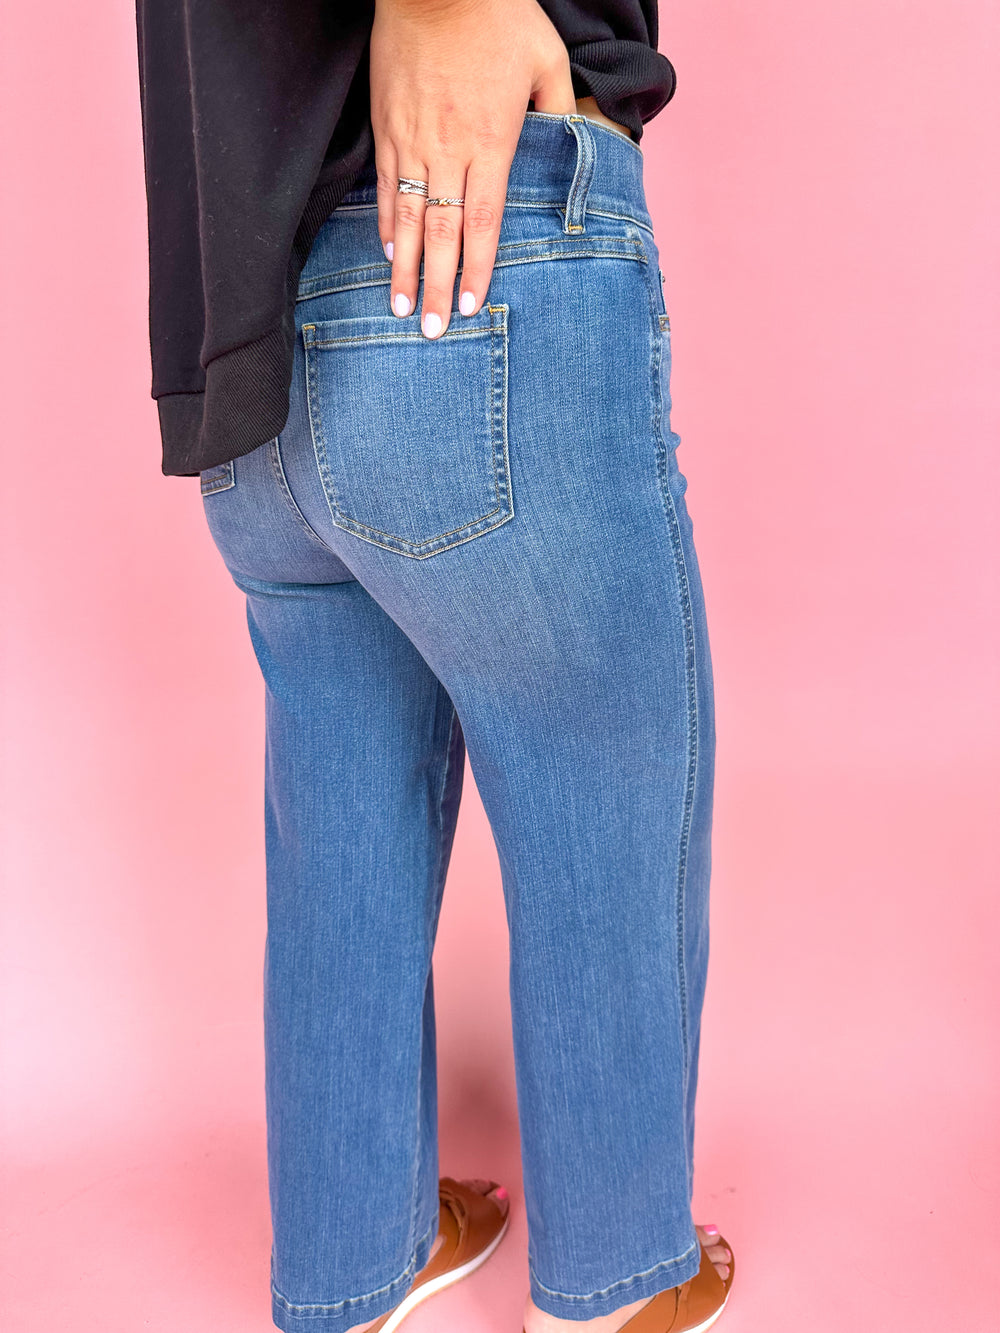 SPANX, Seamed Front Wide Leg Jeans